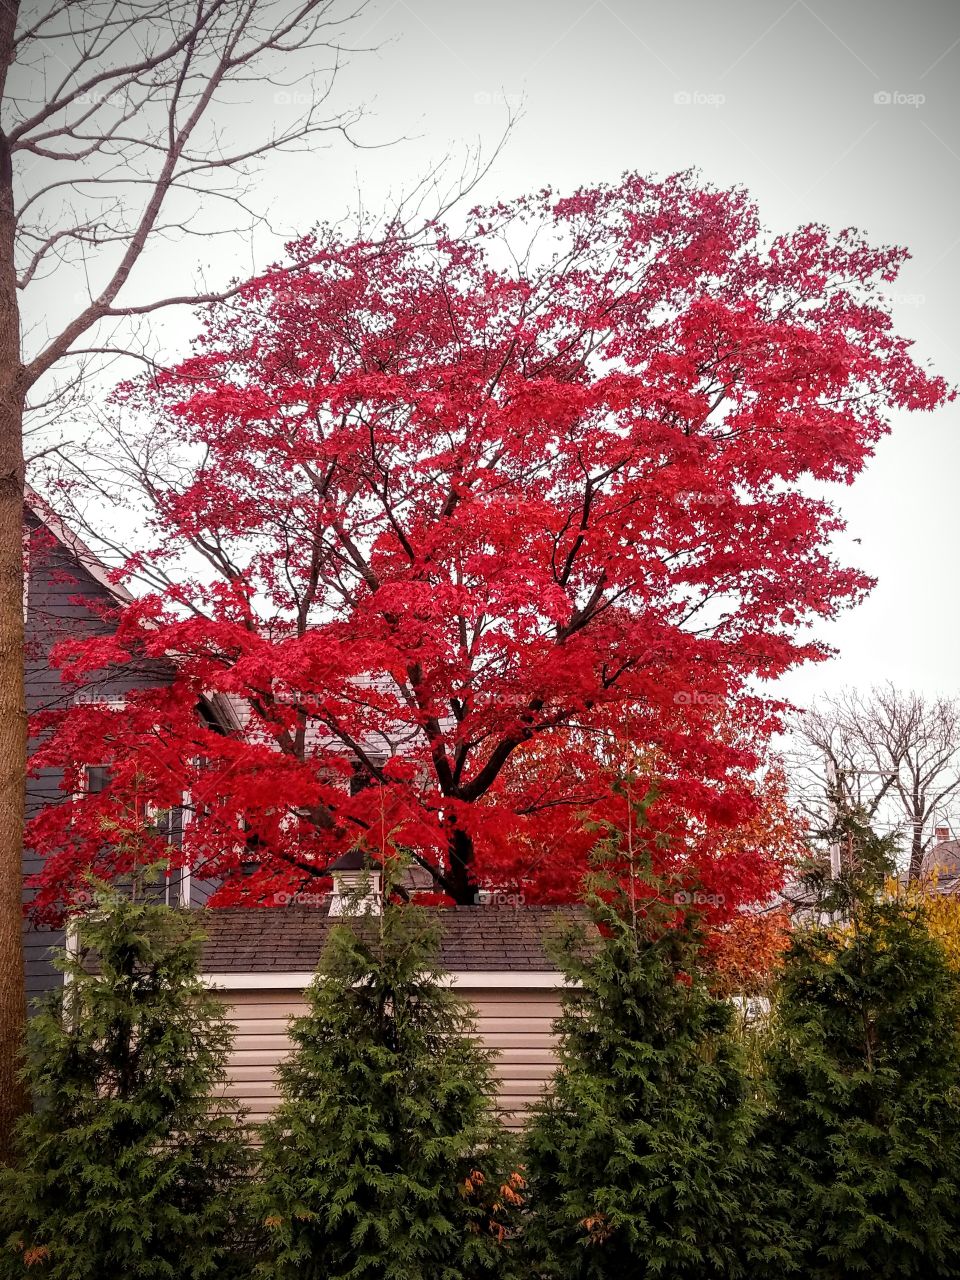 Bright Red Maple Tree with Pine Trees in Foreground